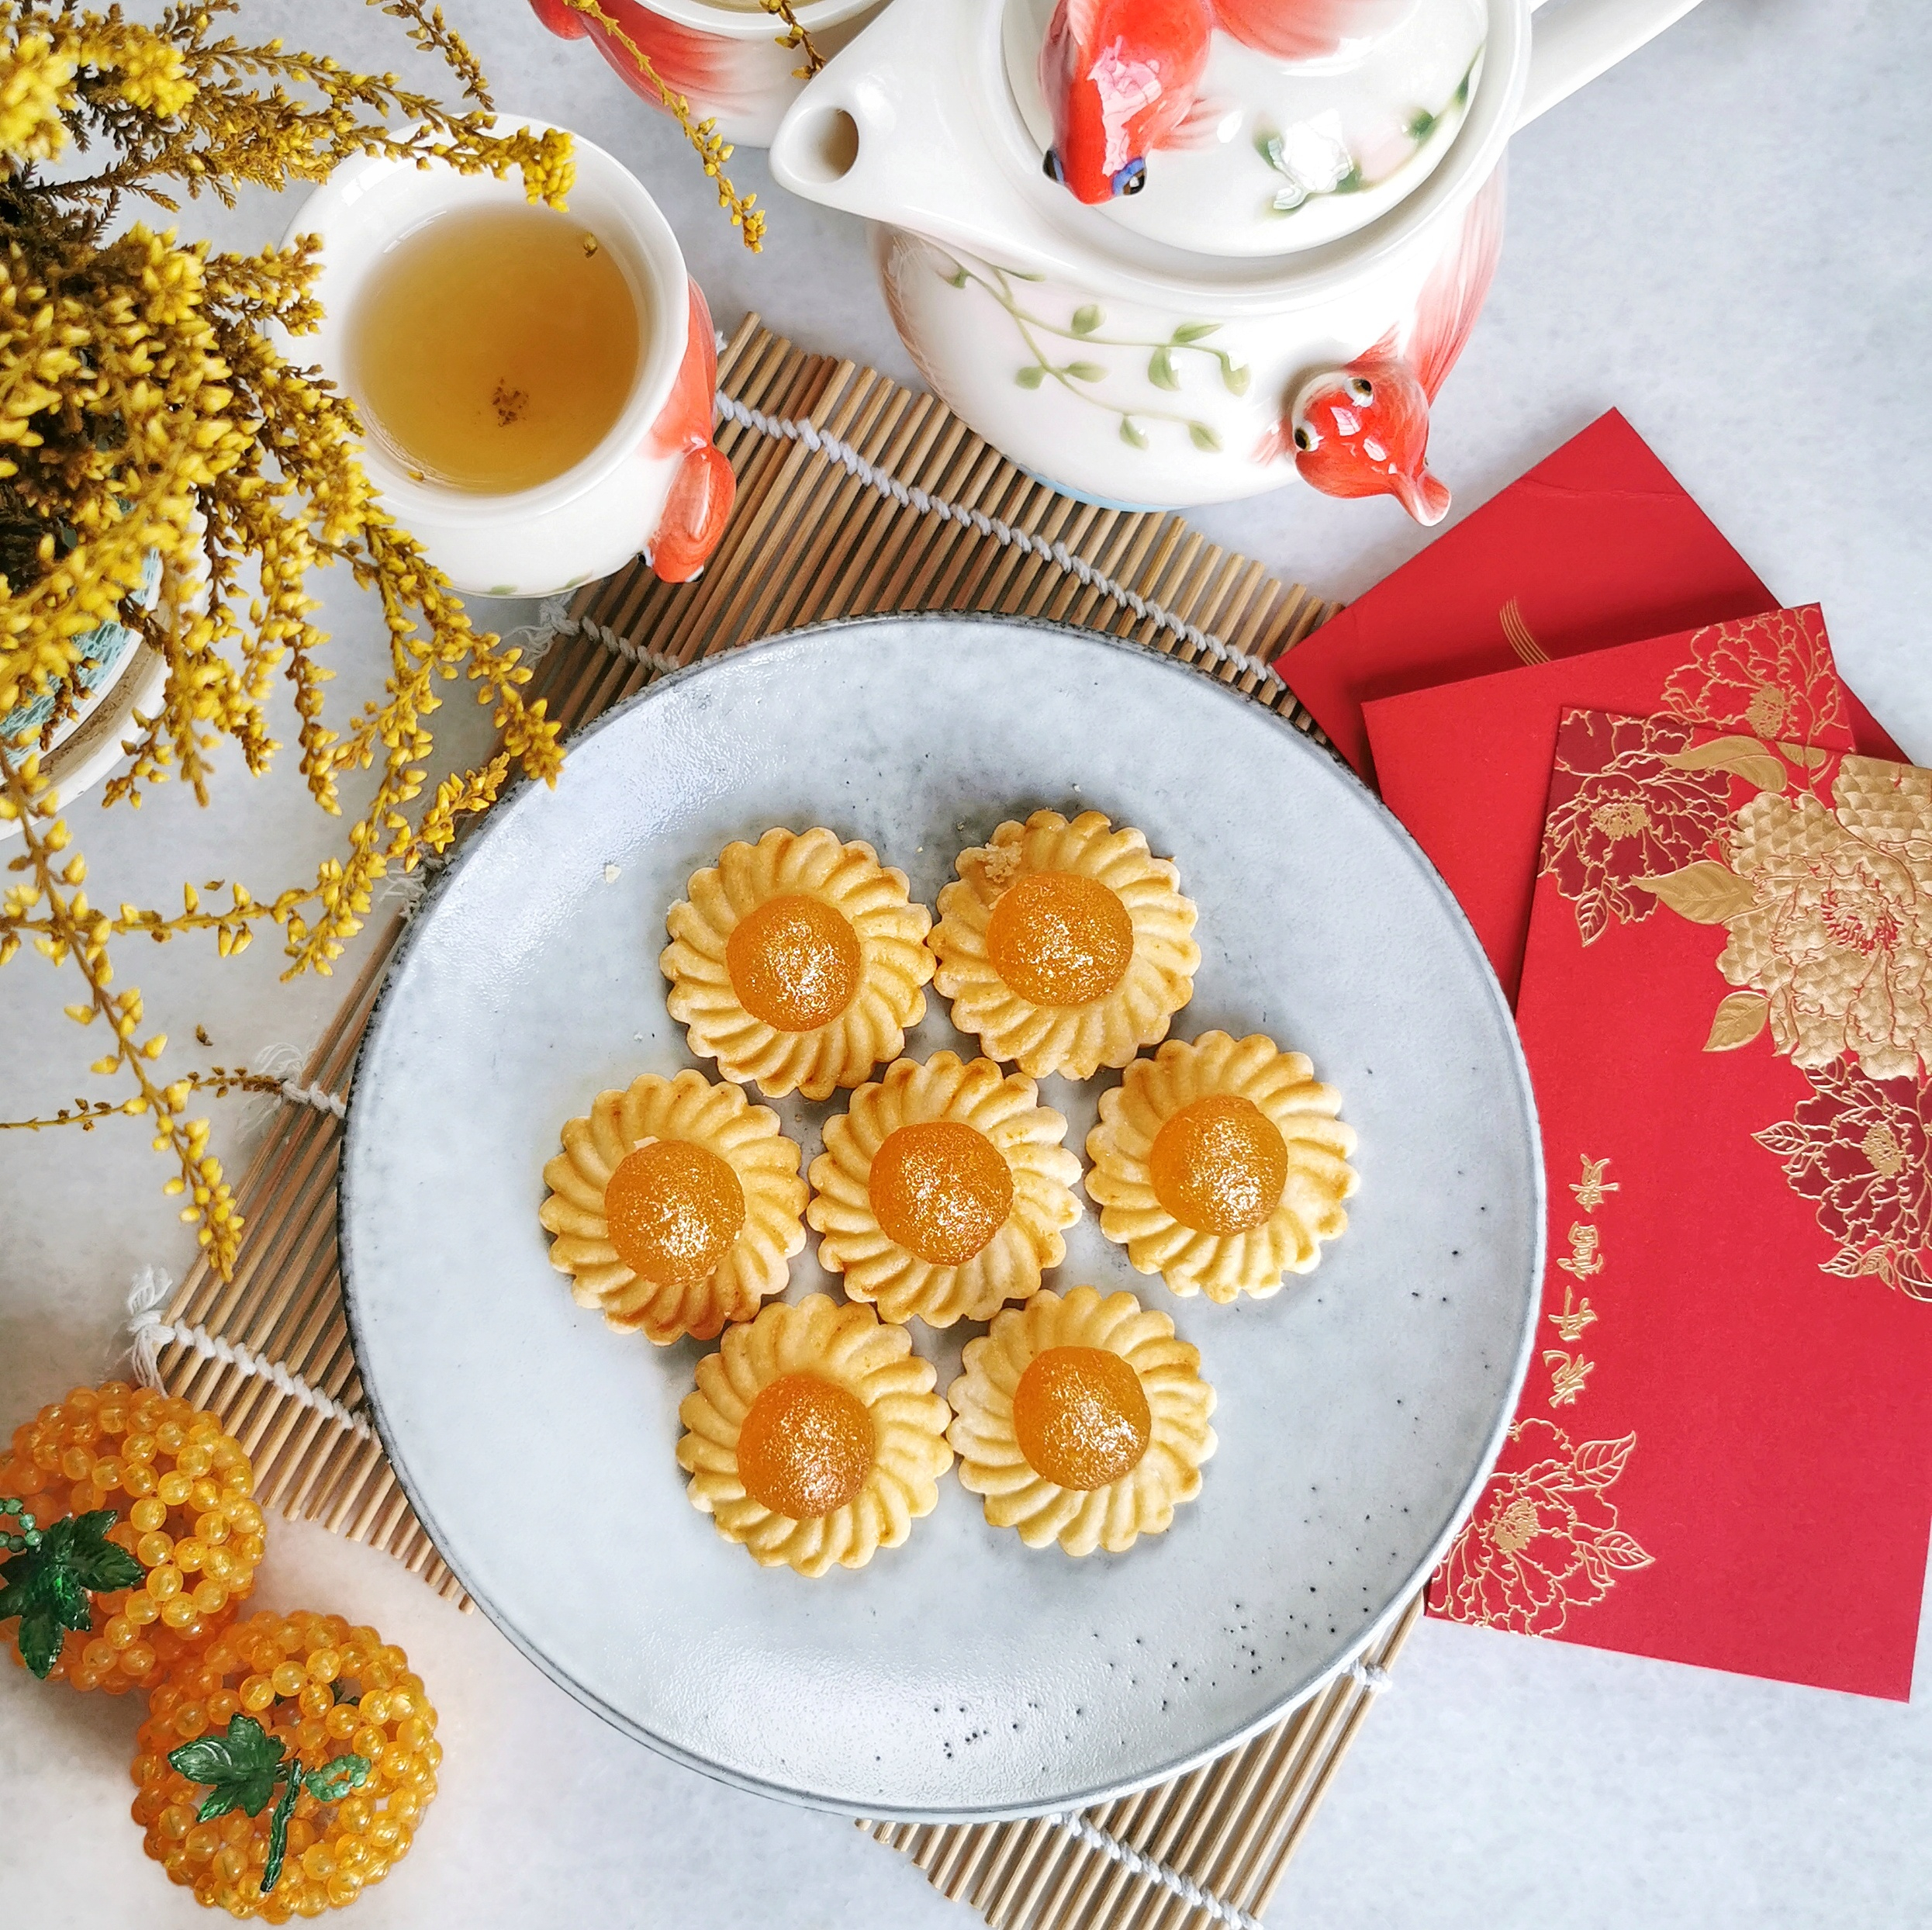 A plate of bite-size tarts is surrounded by tea and red money envelopes.